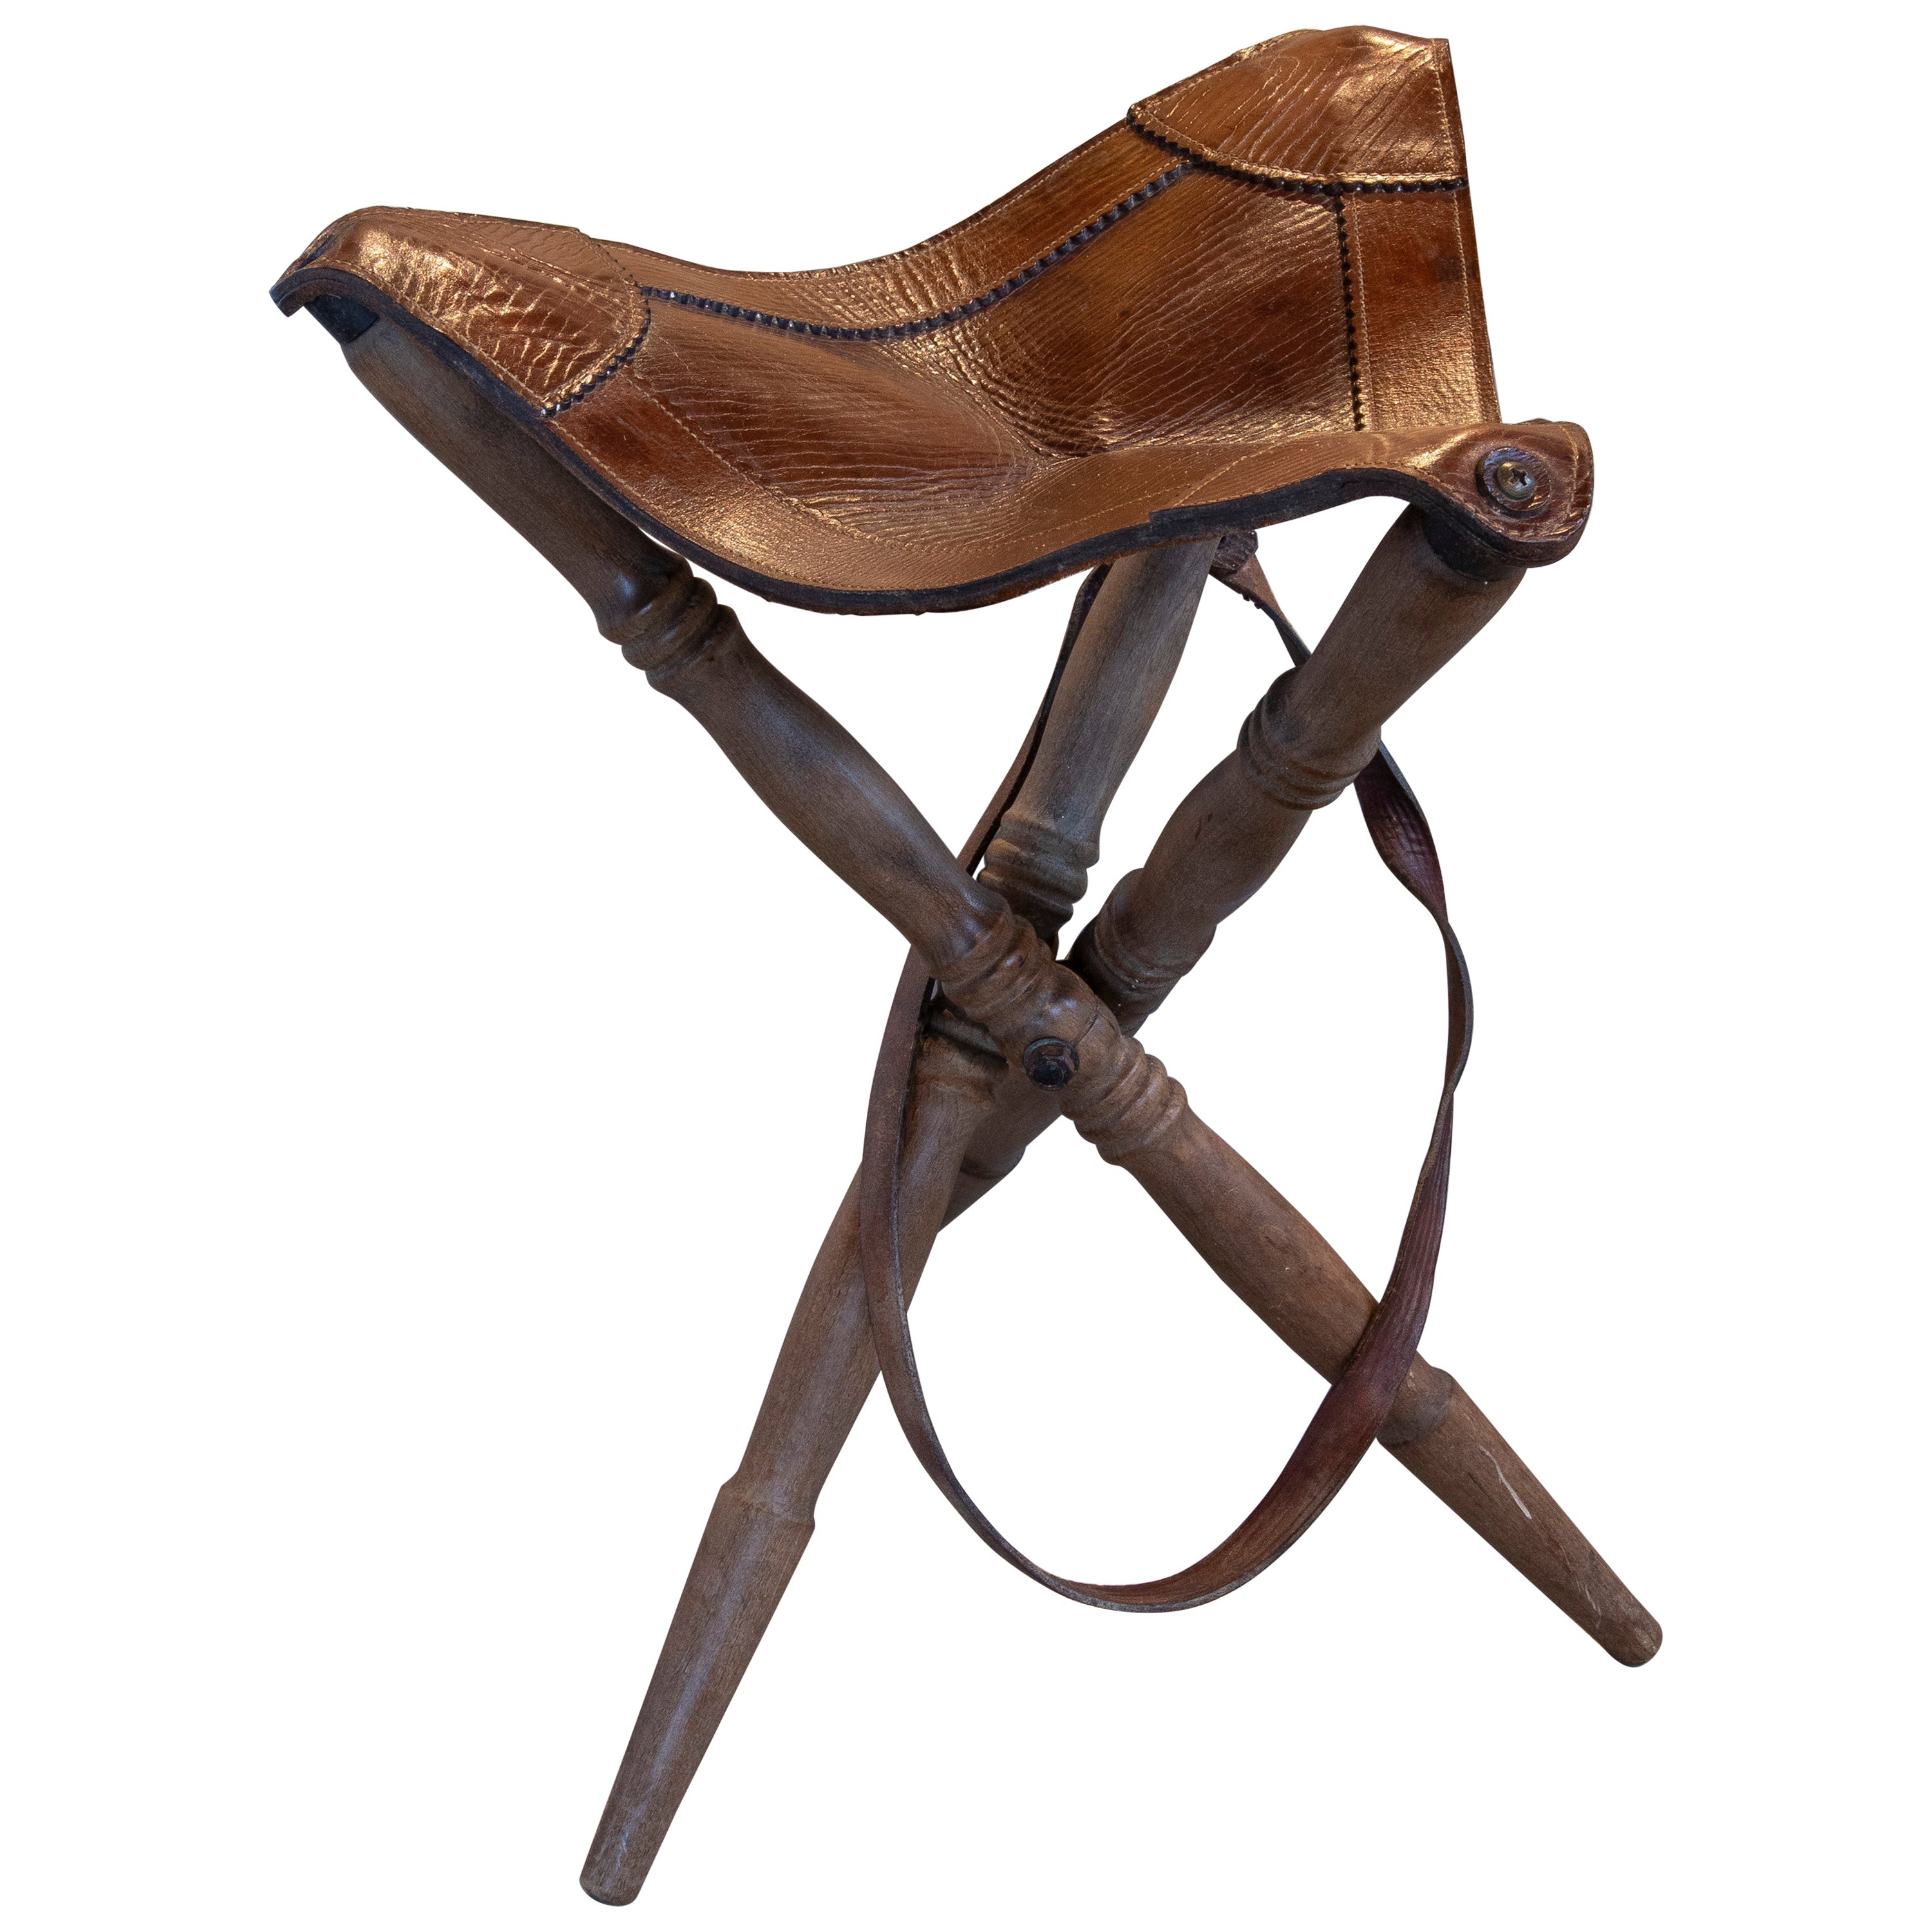 Spanish Folding Stool with Wooden Legs and Leather Seat